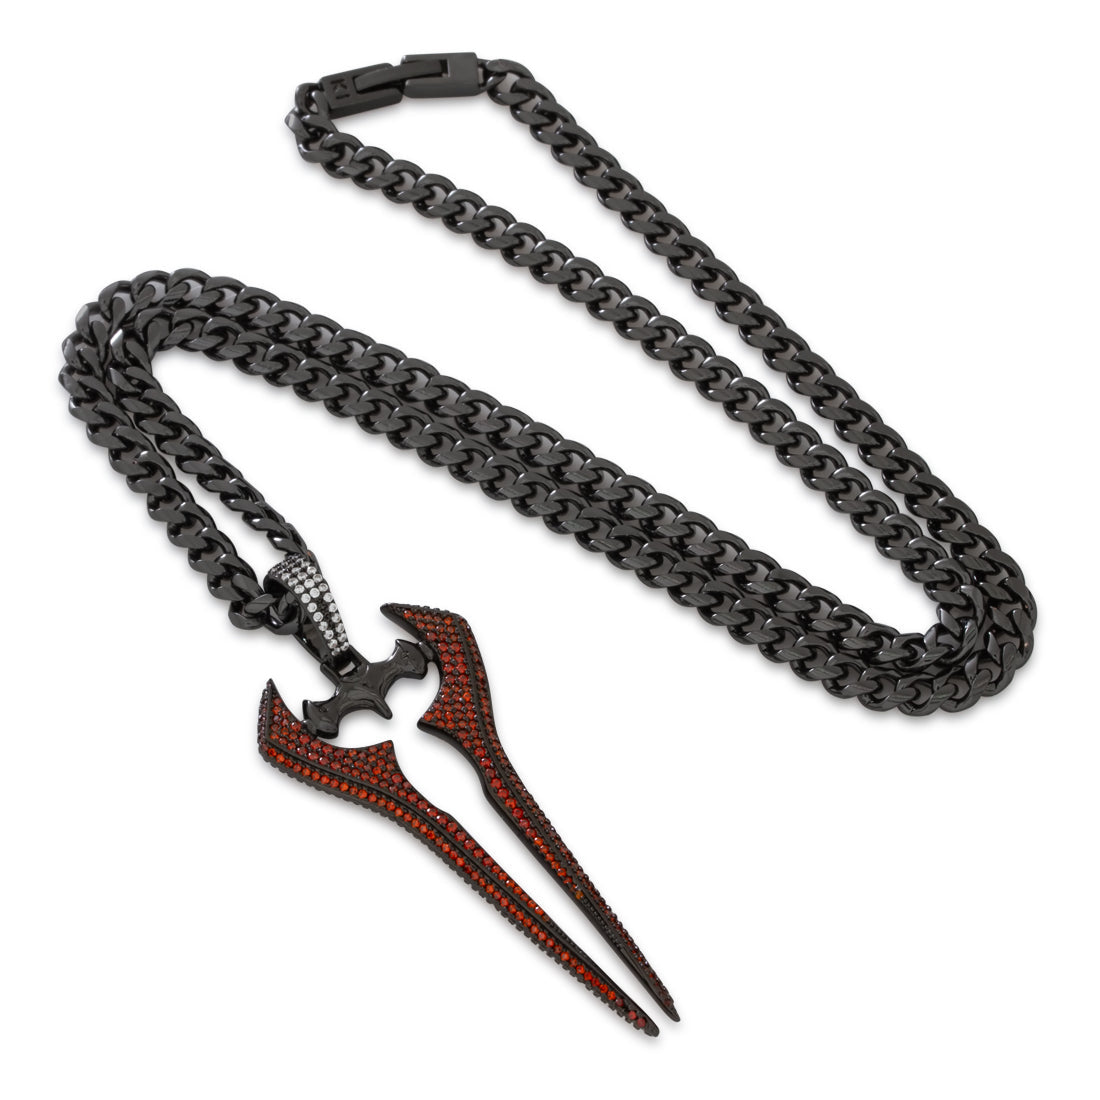 halo x king ice le bloodblade energy sword necklace black gold 2 7 king ice 35460575592623